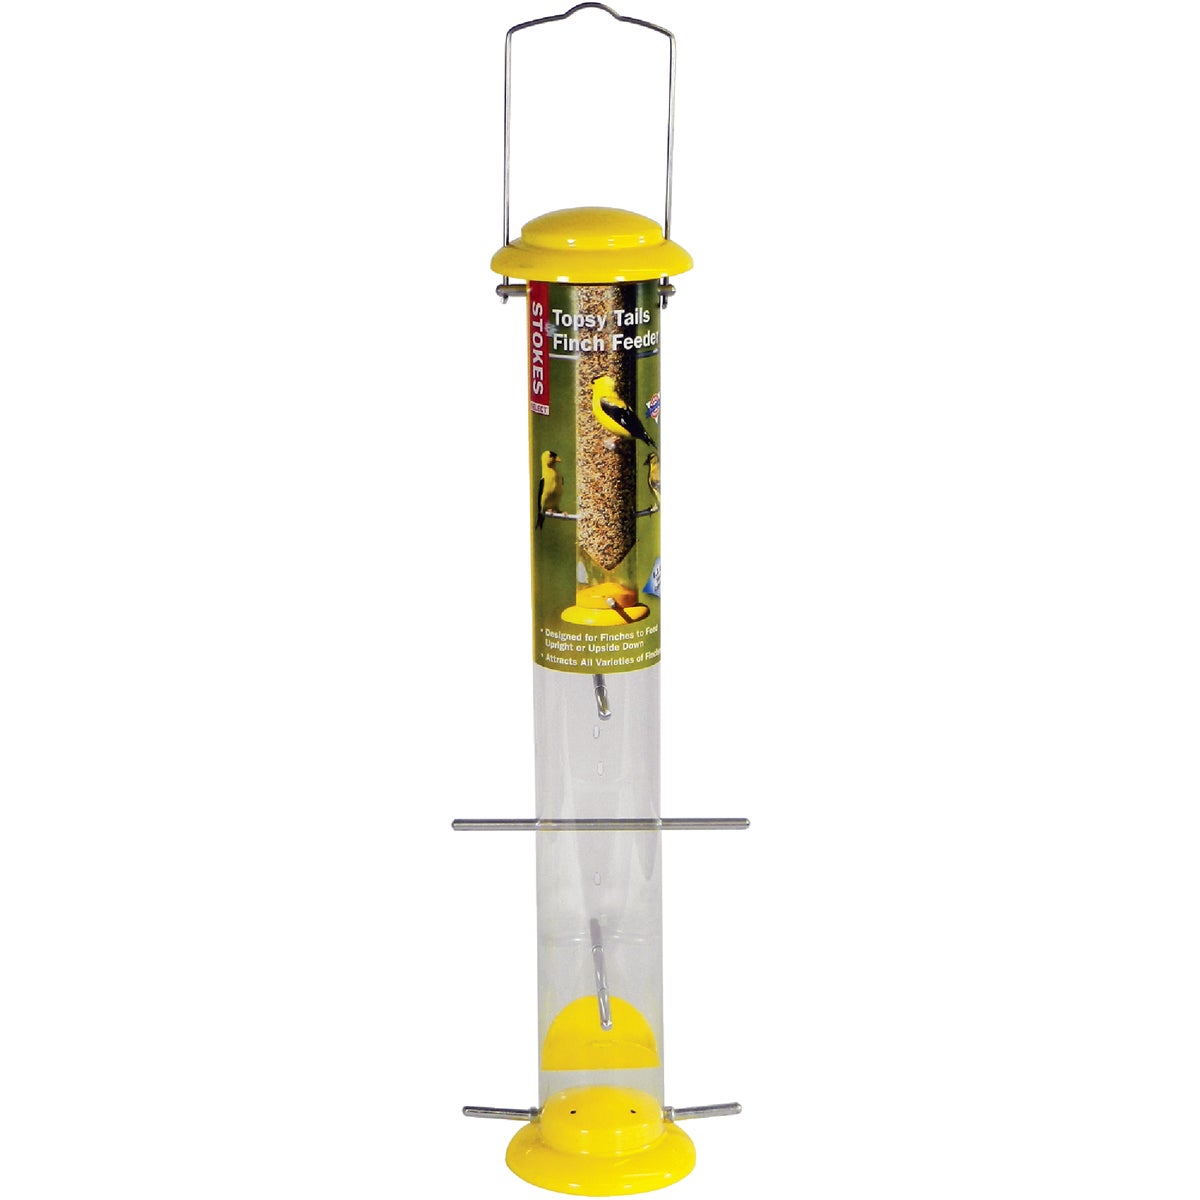 Item 700956, Attract your favorite finches with this stylish new feeder.